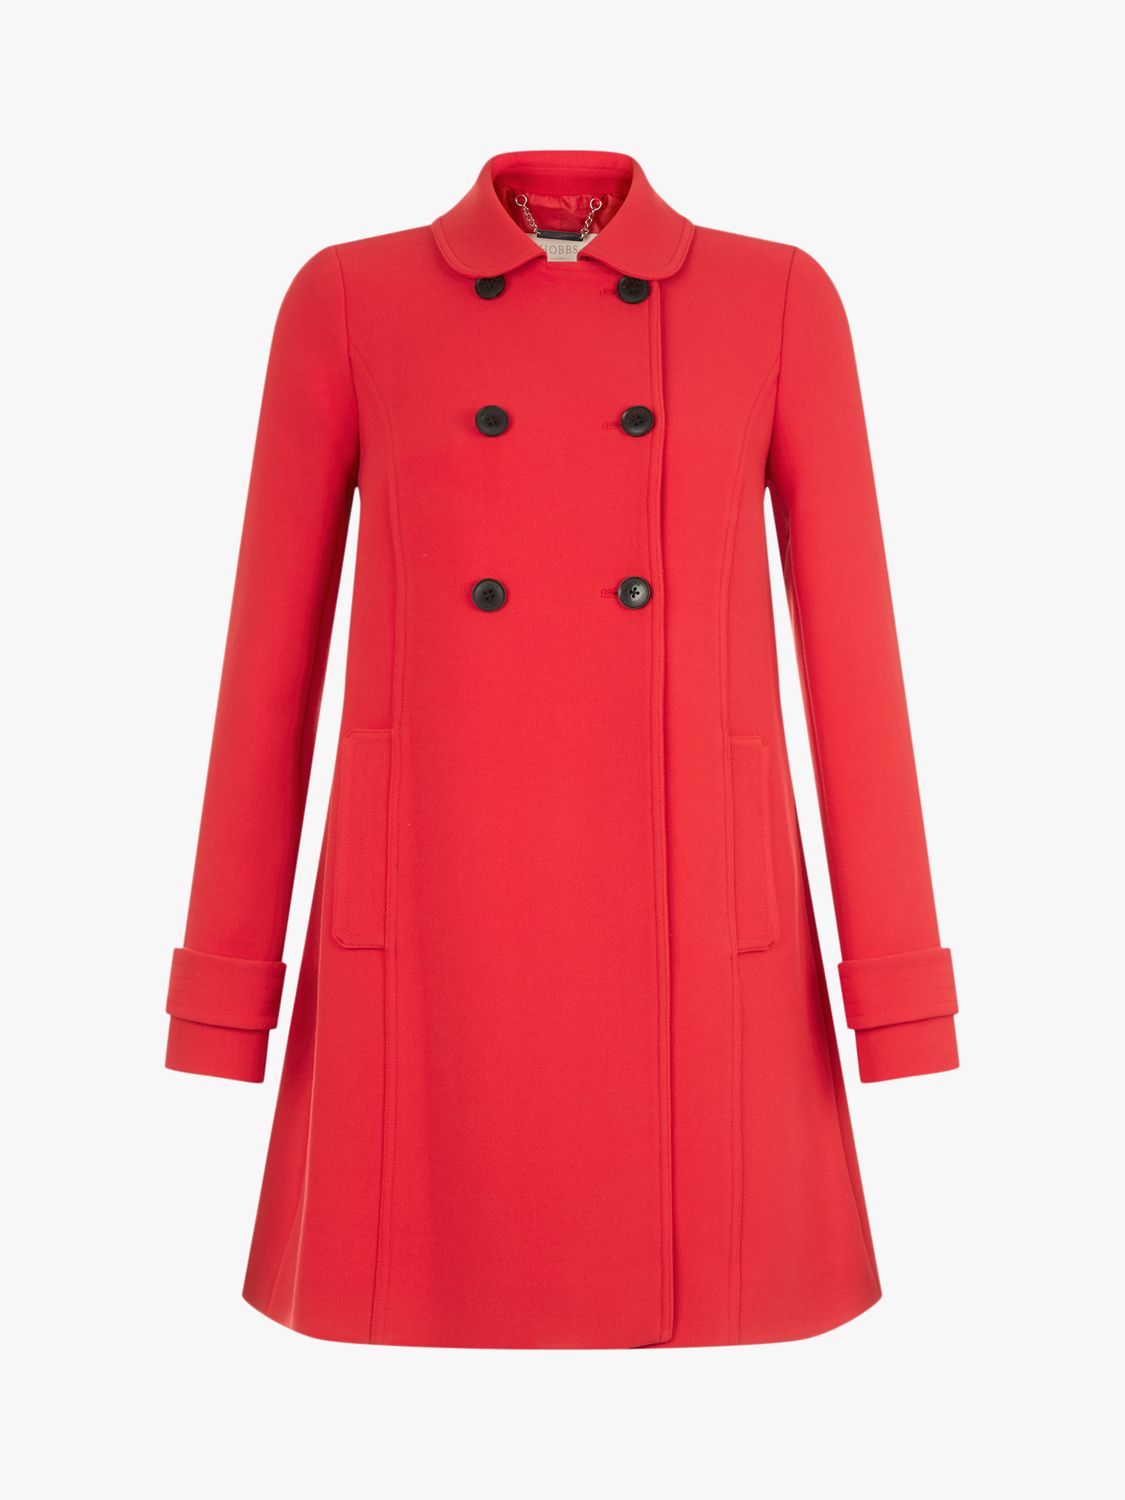 Hobbs Adrienne Double Breasted Pea Coat, Bright Red